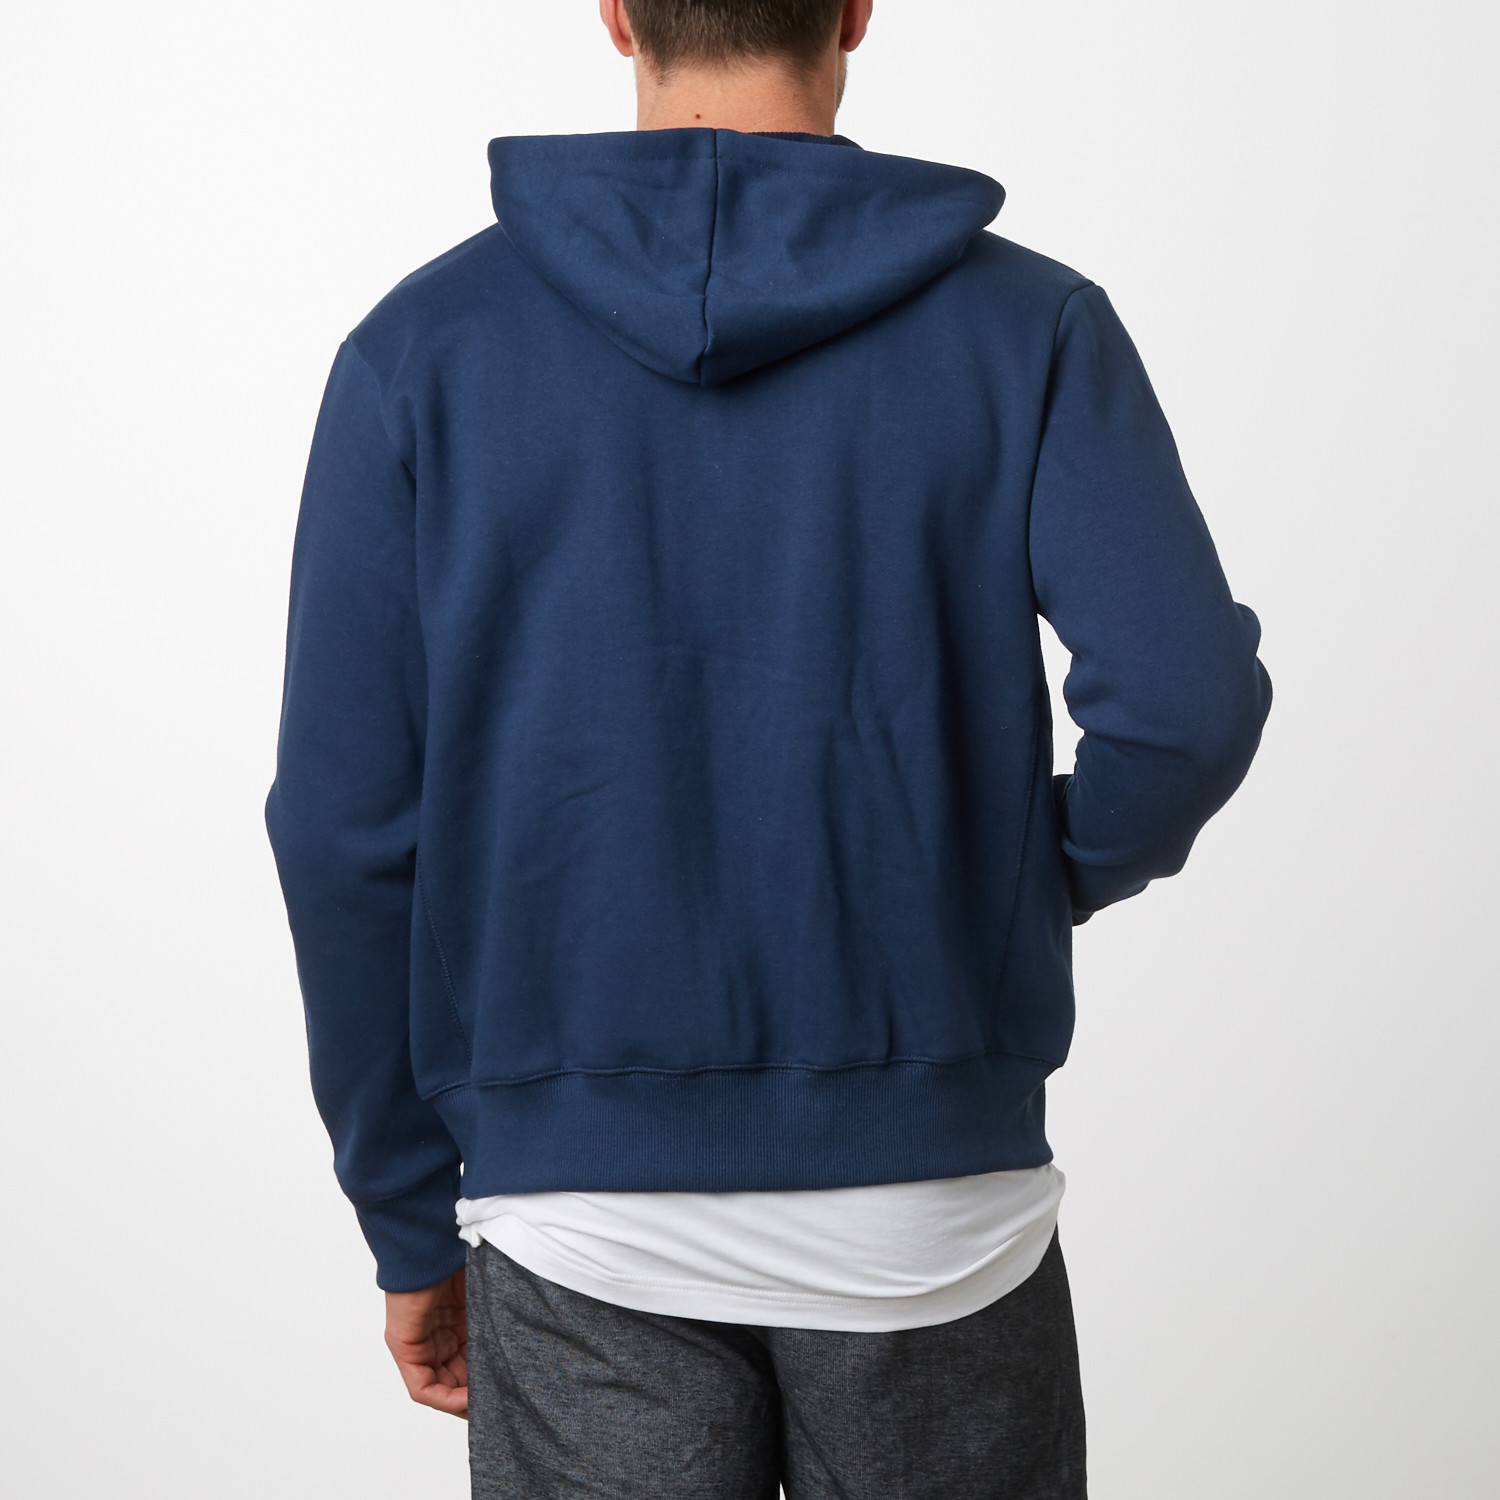 Tech Fleece Thermal Lined Hoodie // Navy (S) - Ethan Williams - Touch ...